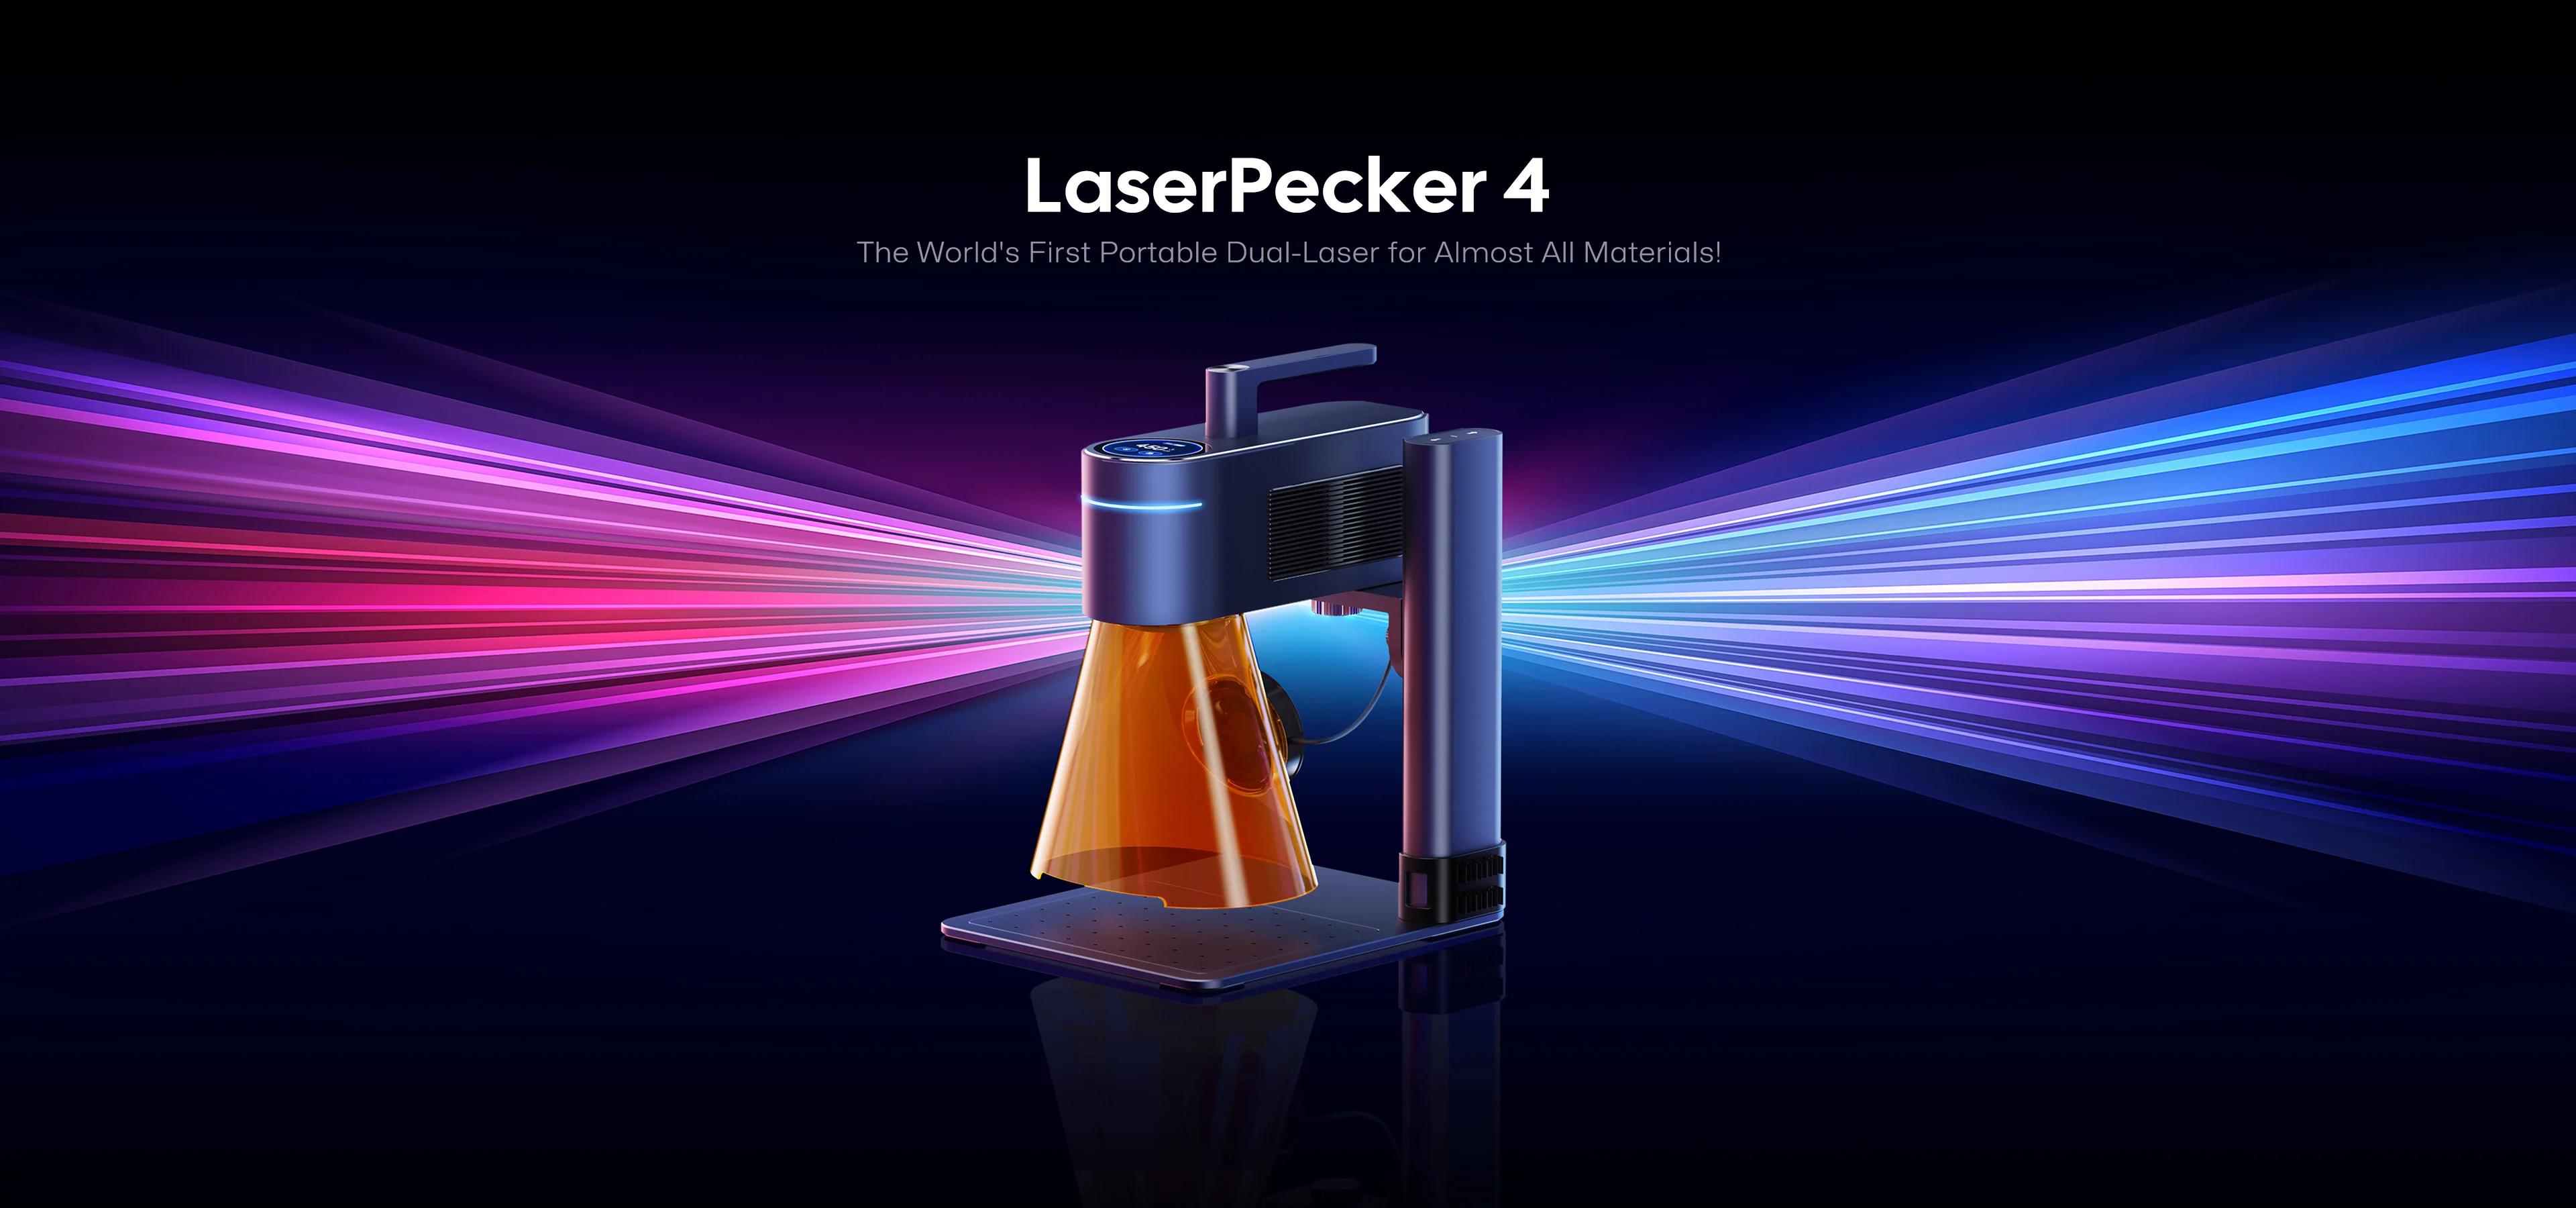 LaserPecker LP4 - The World's First Dual-laser Engraver for Most Mater